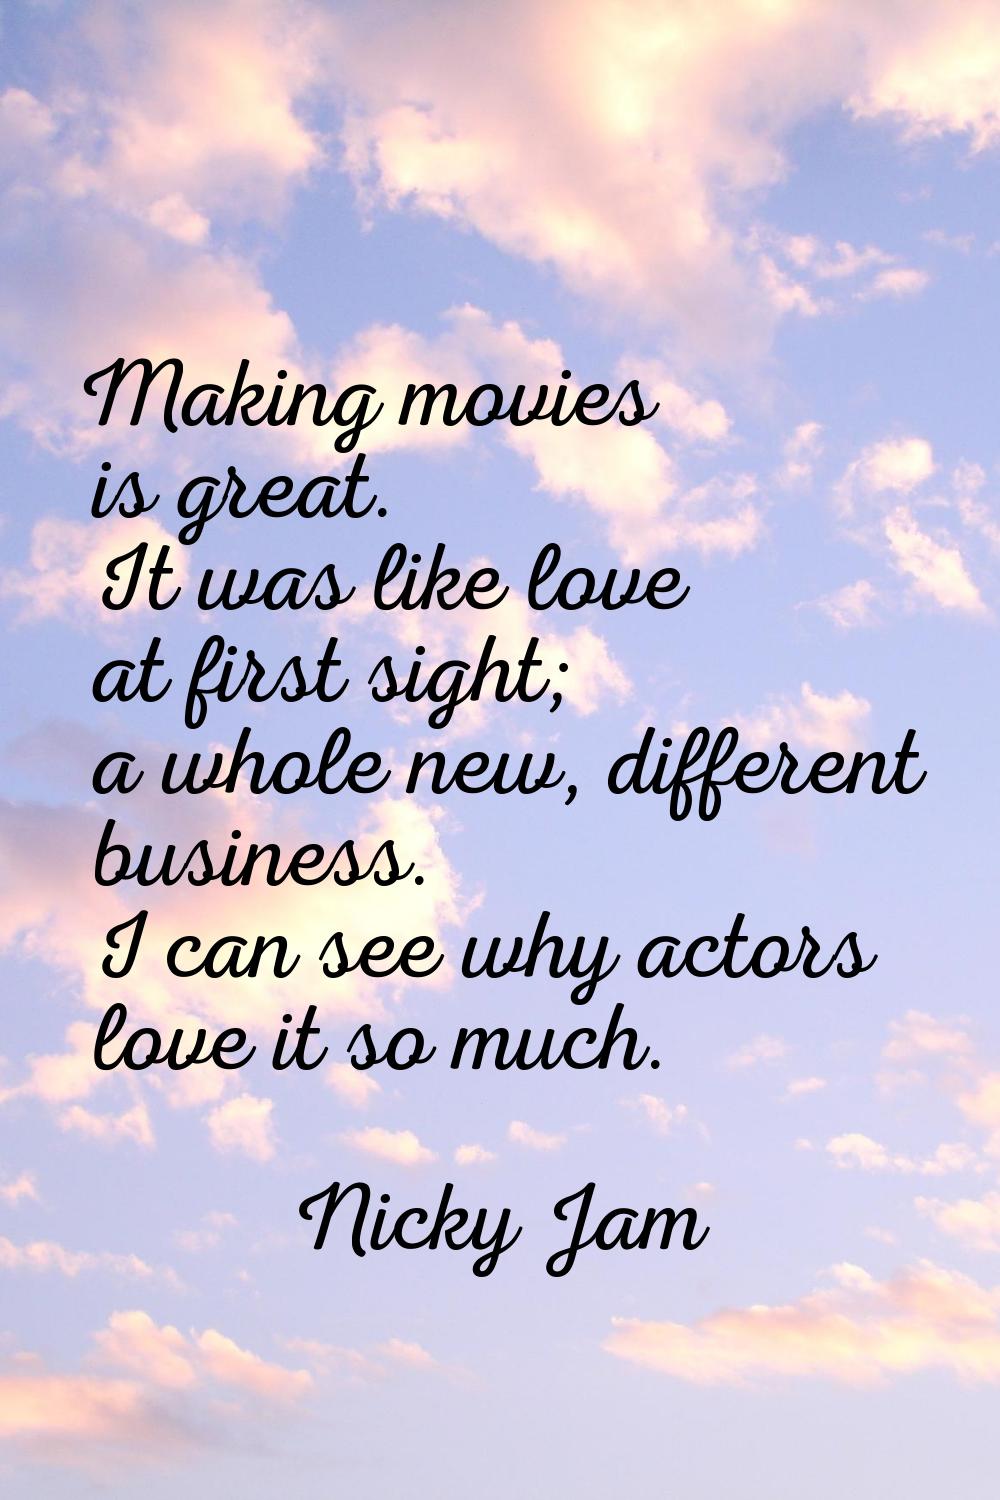 Making movies is great. It was like love at first sight; a whole new, different business. I can see